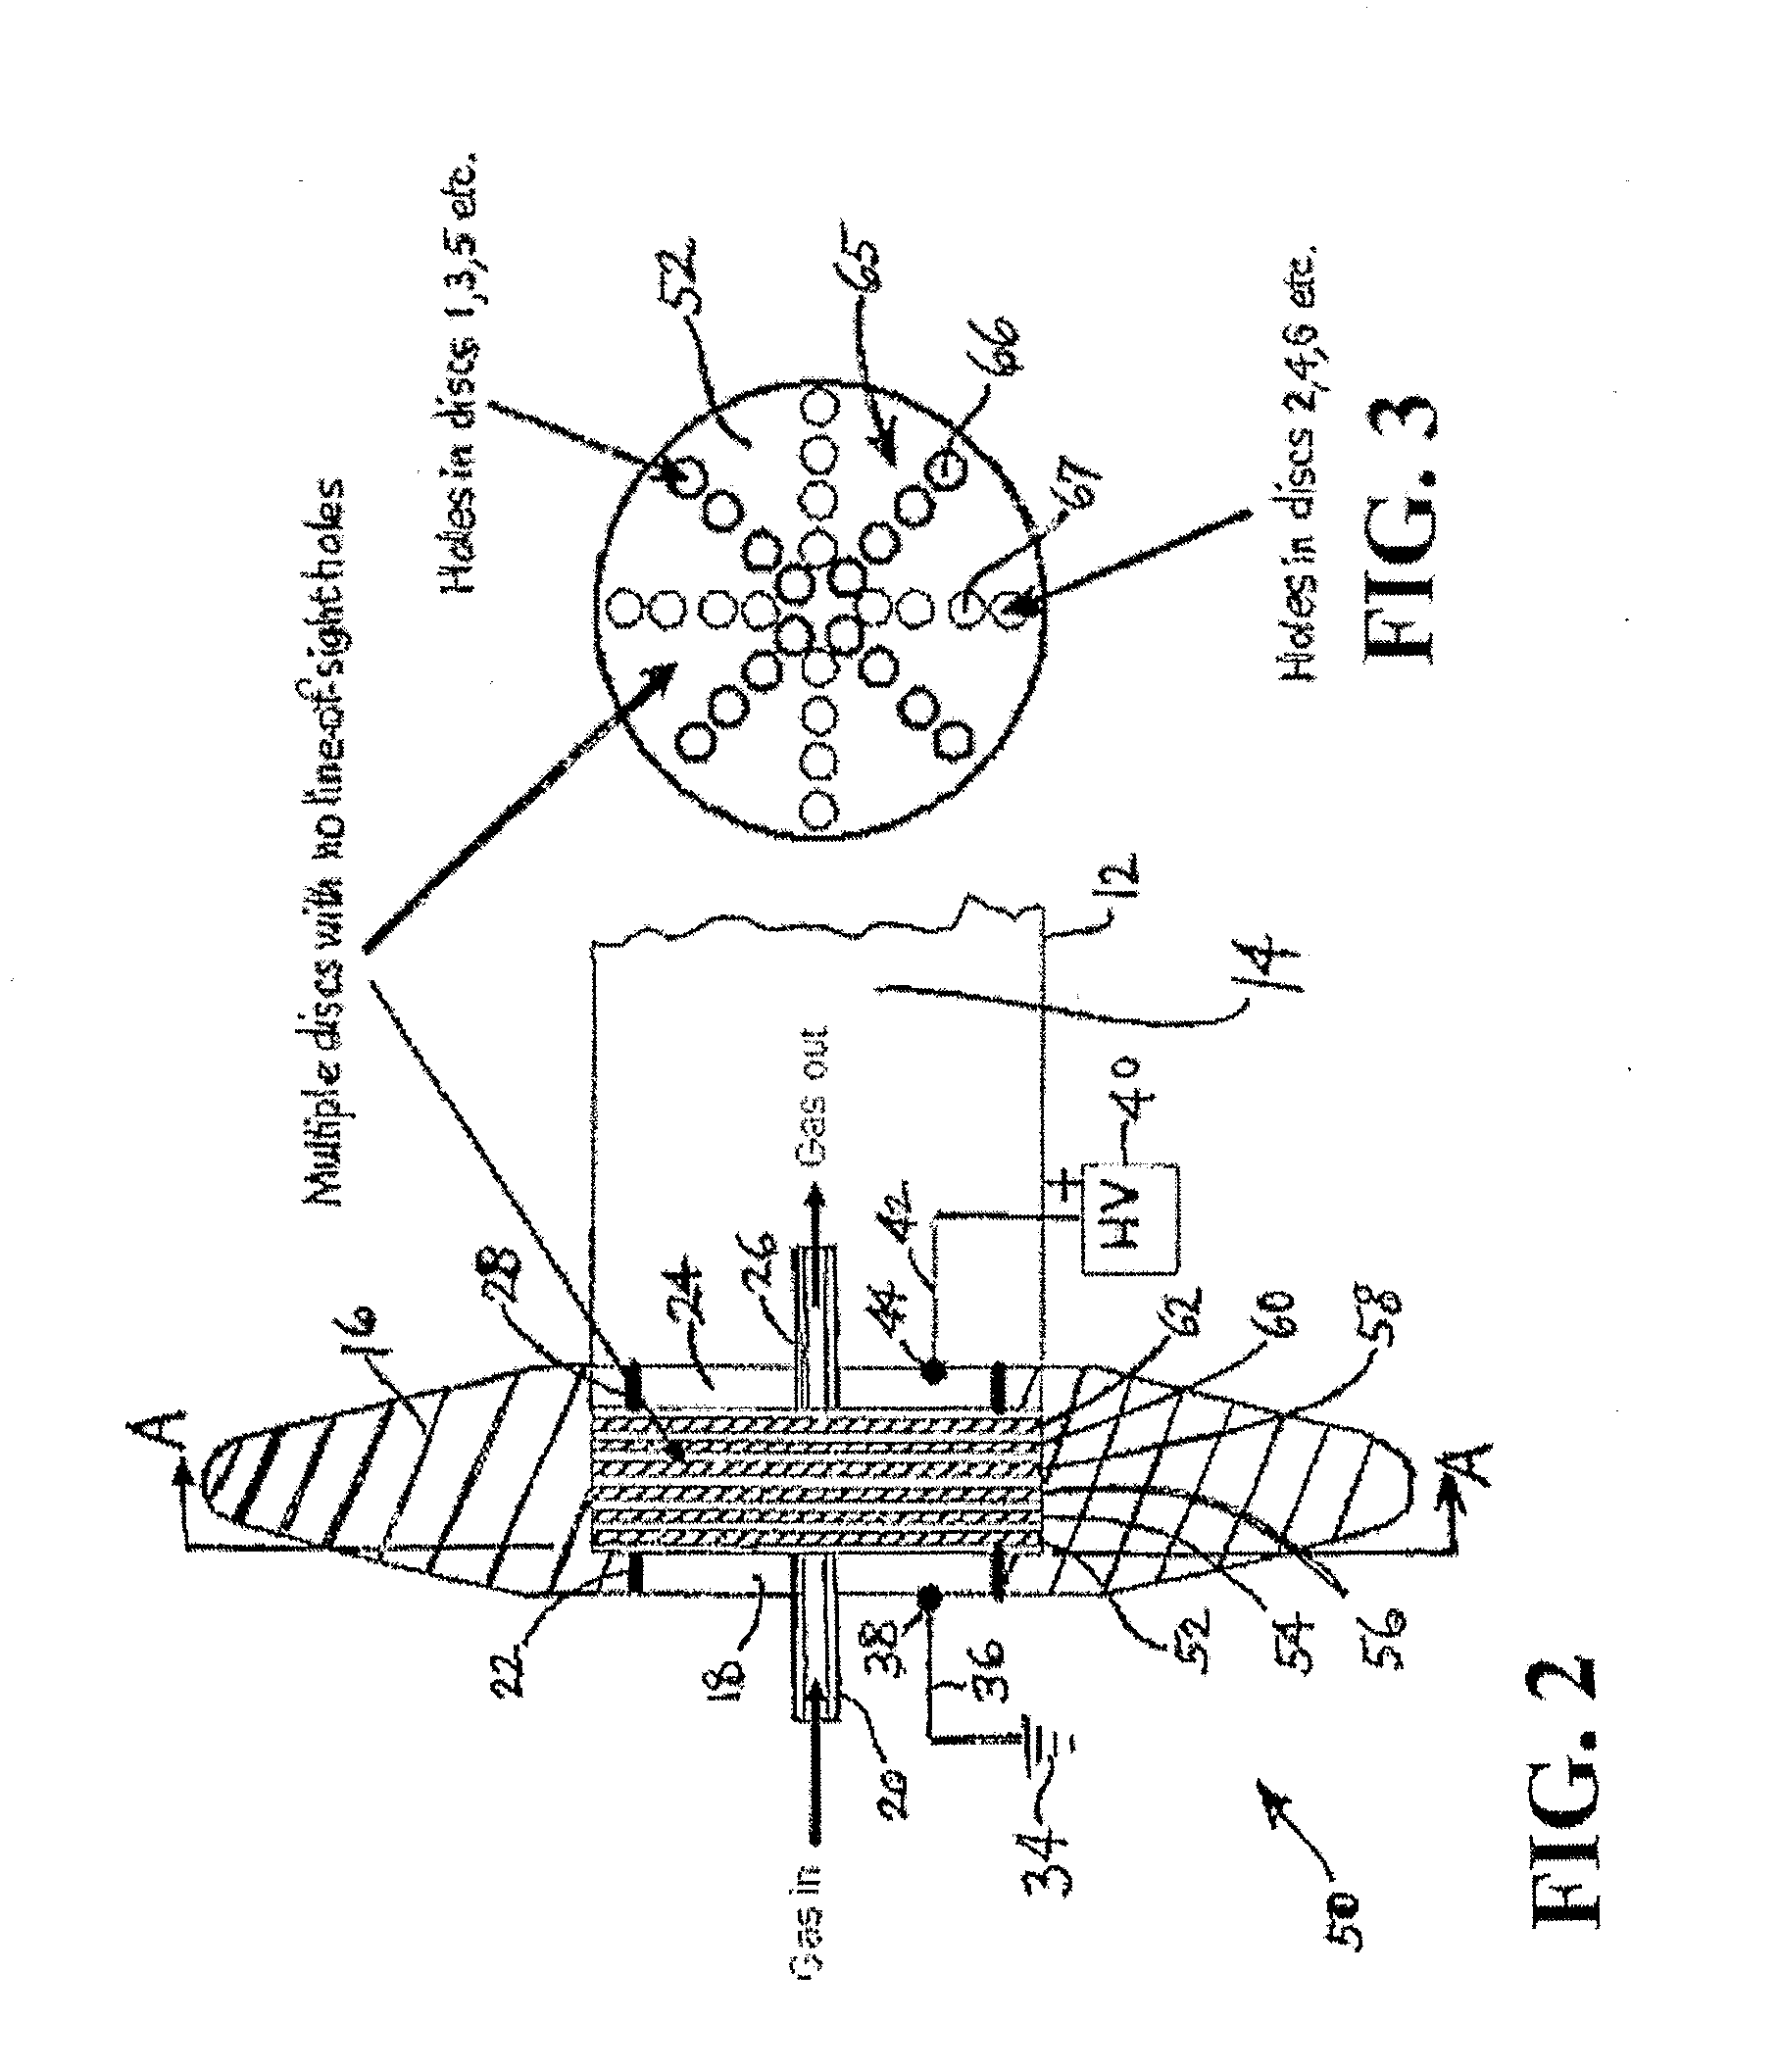 Delivery of Low Pressure Dopant Gas to a High Voltage Ion Source